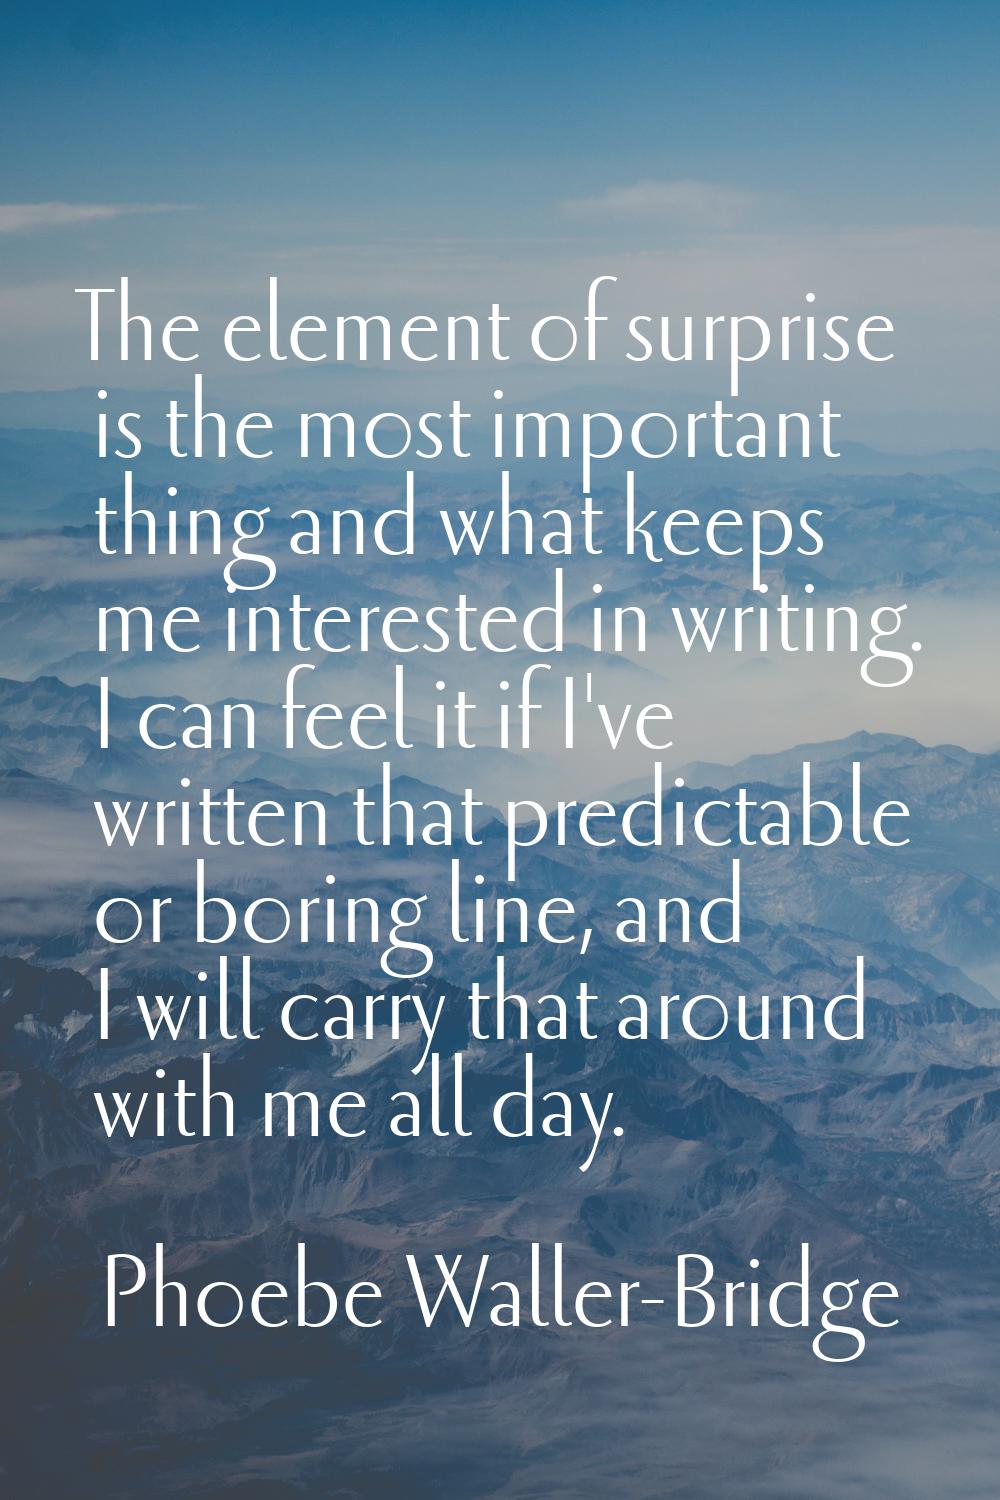 The element of surprise is the most important thing and what keeps me interested in writing. I can 